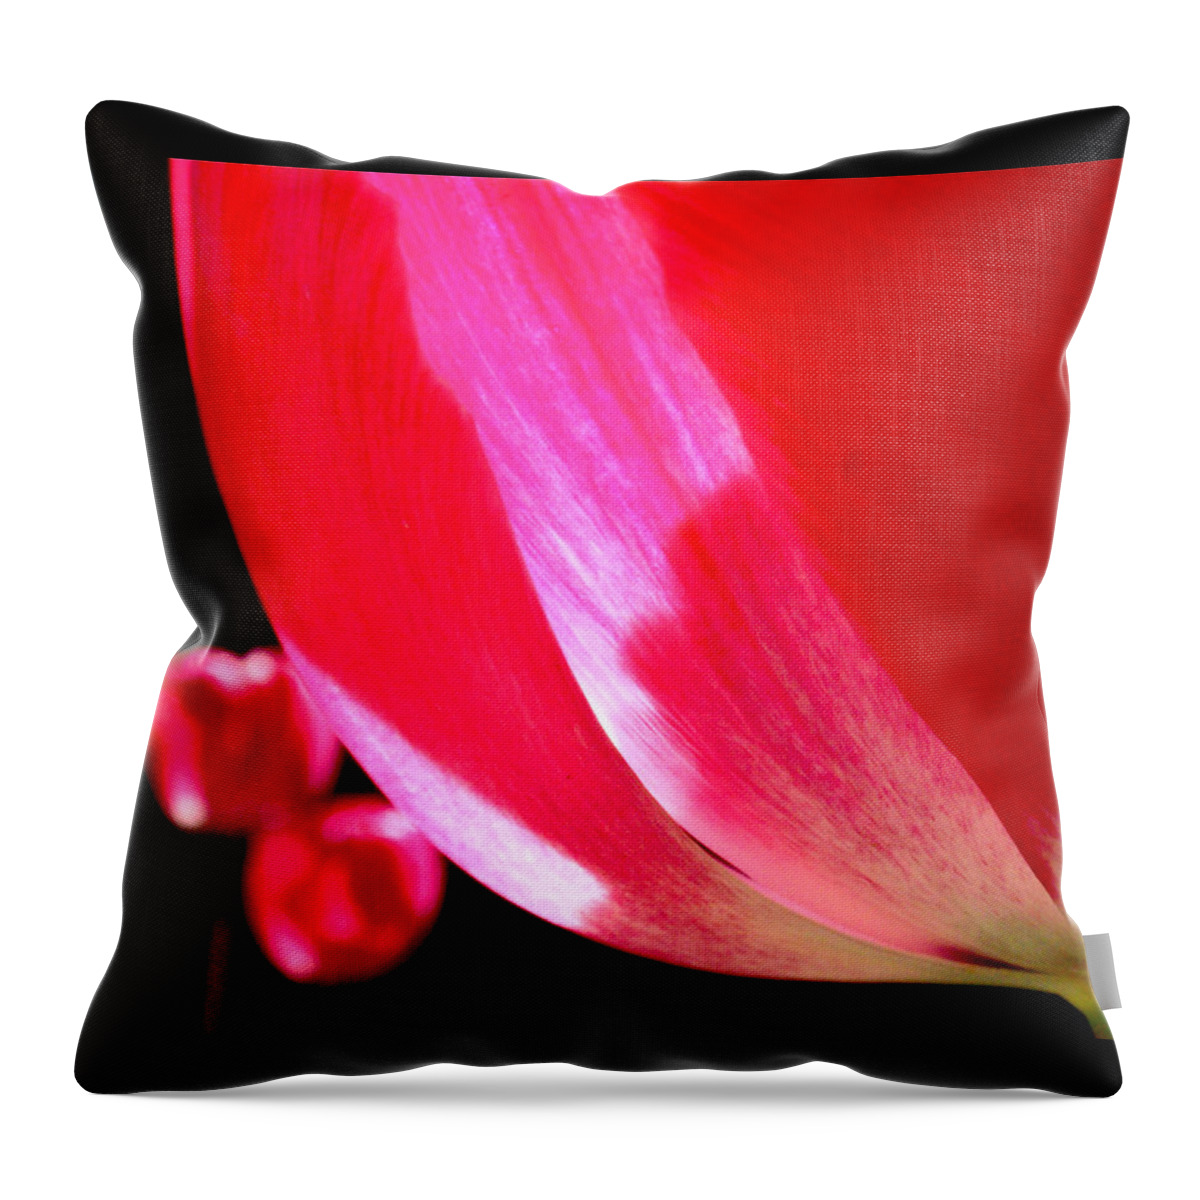 Tulips Throw Pillow featuring the photograph Kissing by Rona Black